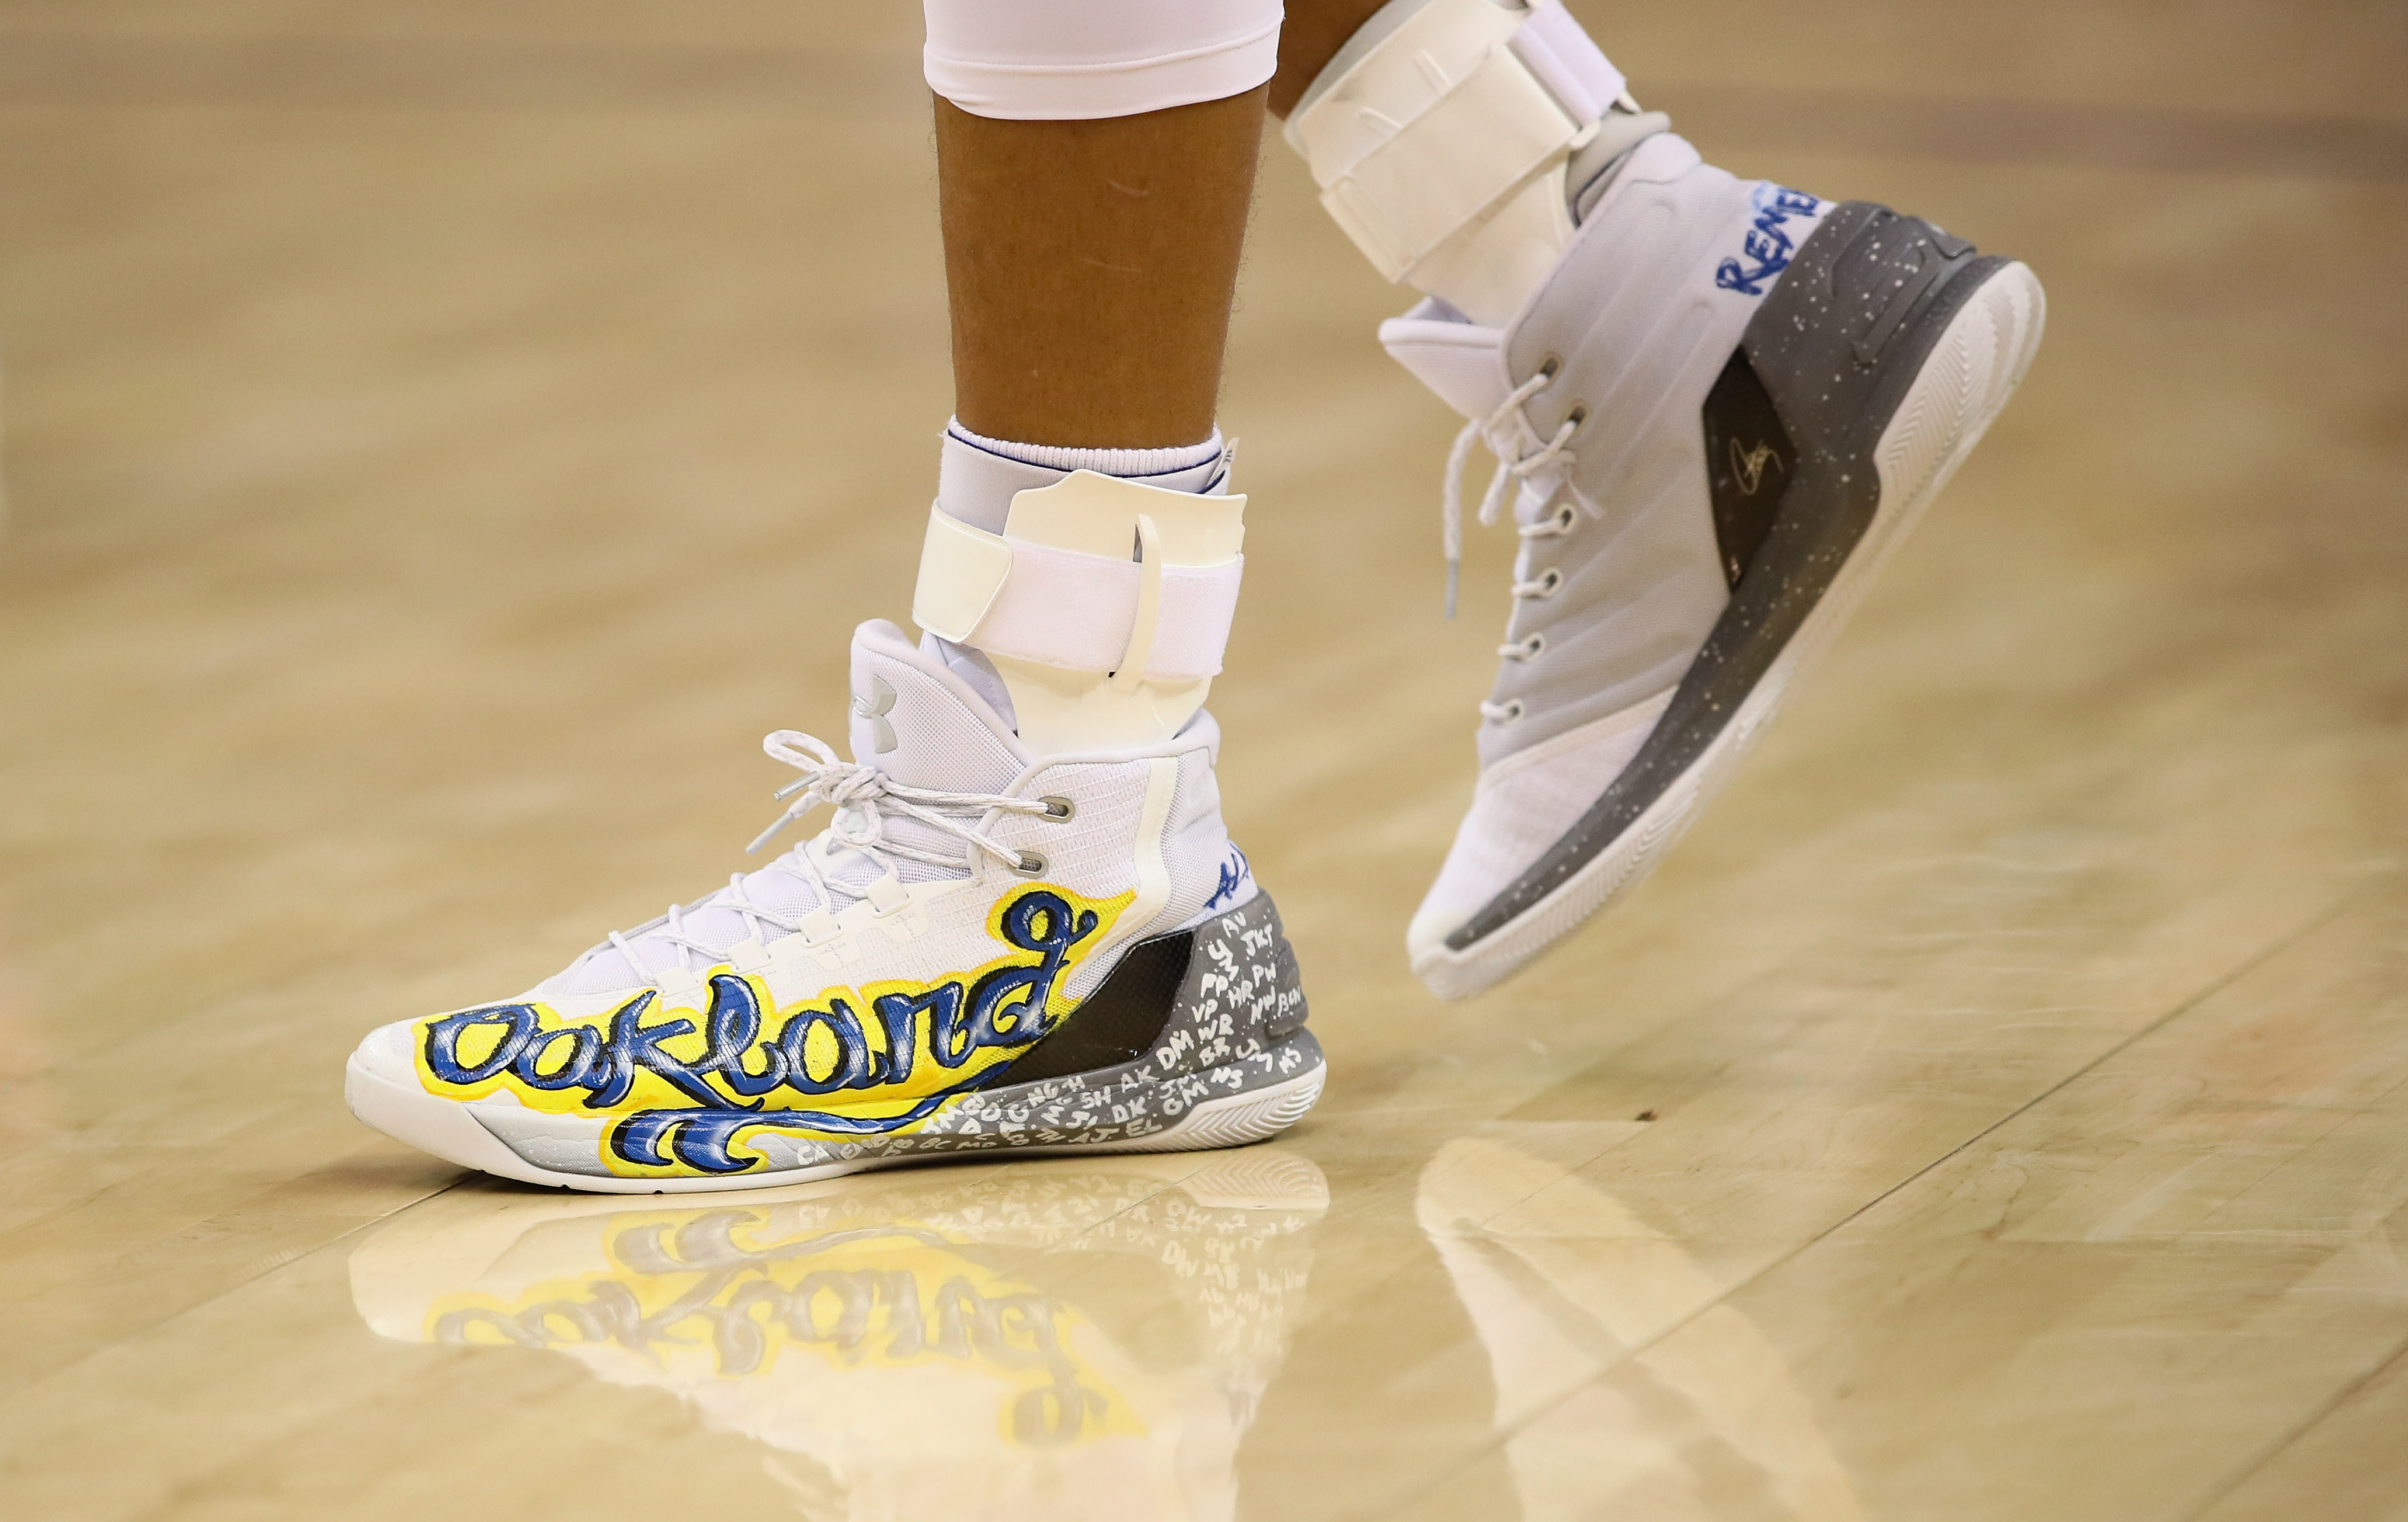 OAKLAND, CA - DECEMBER 15: A close-up of the shoes that Stephen Curry #30 of the Golden State Warriors wore during their game against the New York Knicks at ORACLE Arena on December 15, 2016 in Oakland, California. The shoes are a tribute to all the lives that were lost in the Ghost Ship warehouse fire in Oakland on December 2. NOTE TO USER: User expressly acknowledges and agrees that, by downloading and or using this photograph, User is consenting to the terms and conditions of the Getty Images License Agreement.   Ezra Shaw/Getty Images/AFP